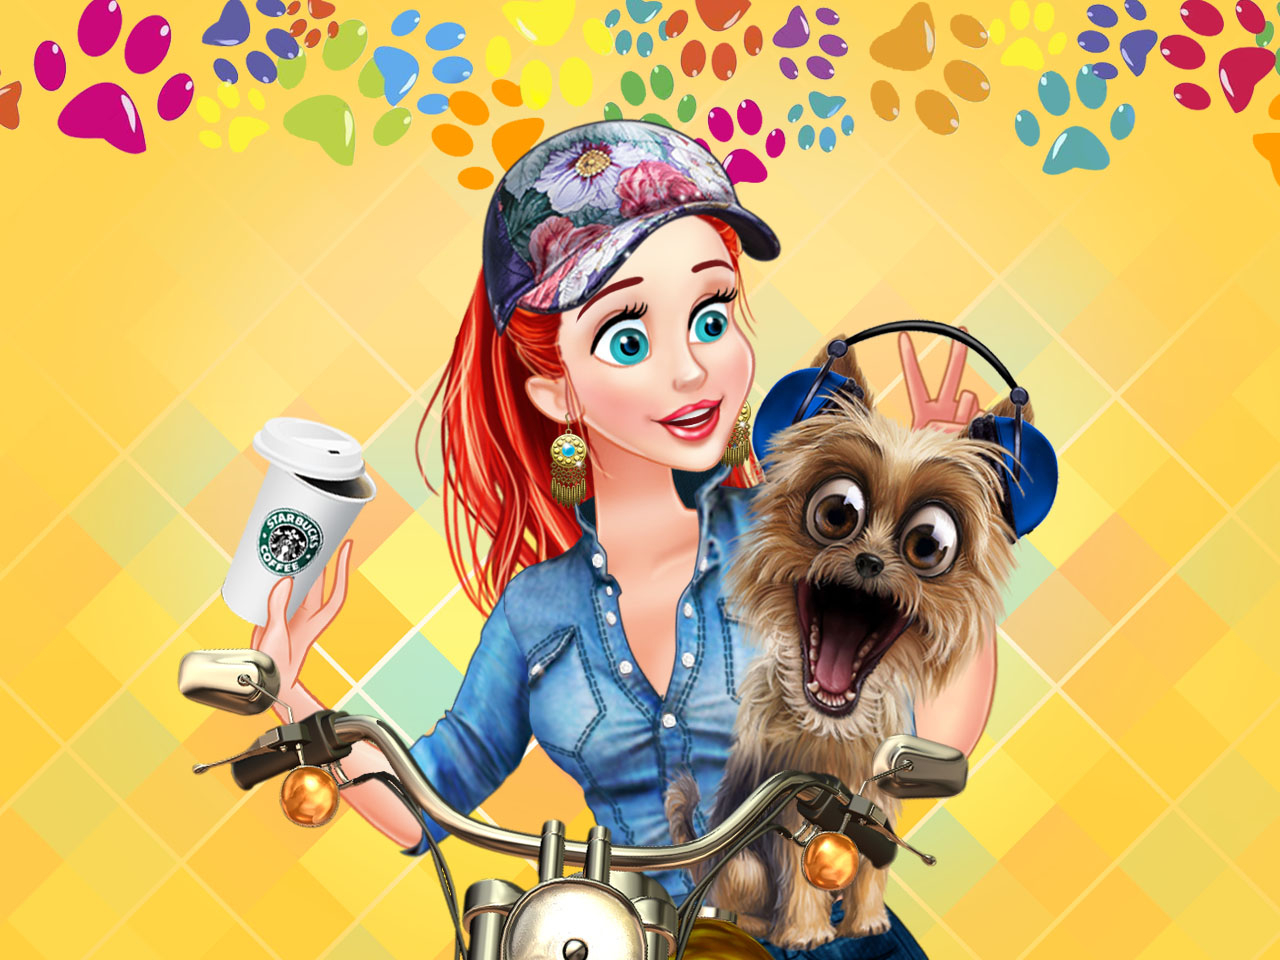 Pet Games - Play Free Online Girl Games at 